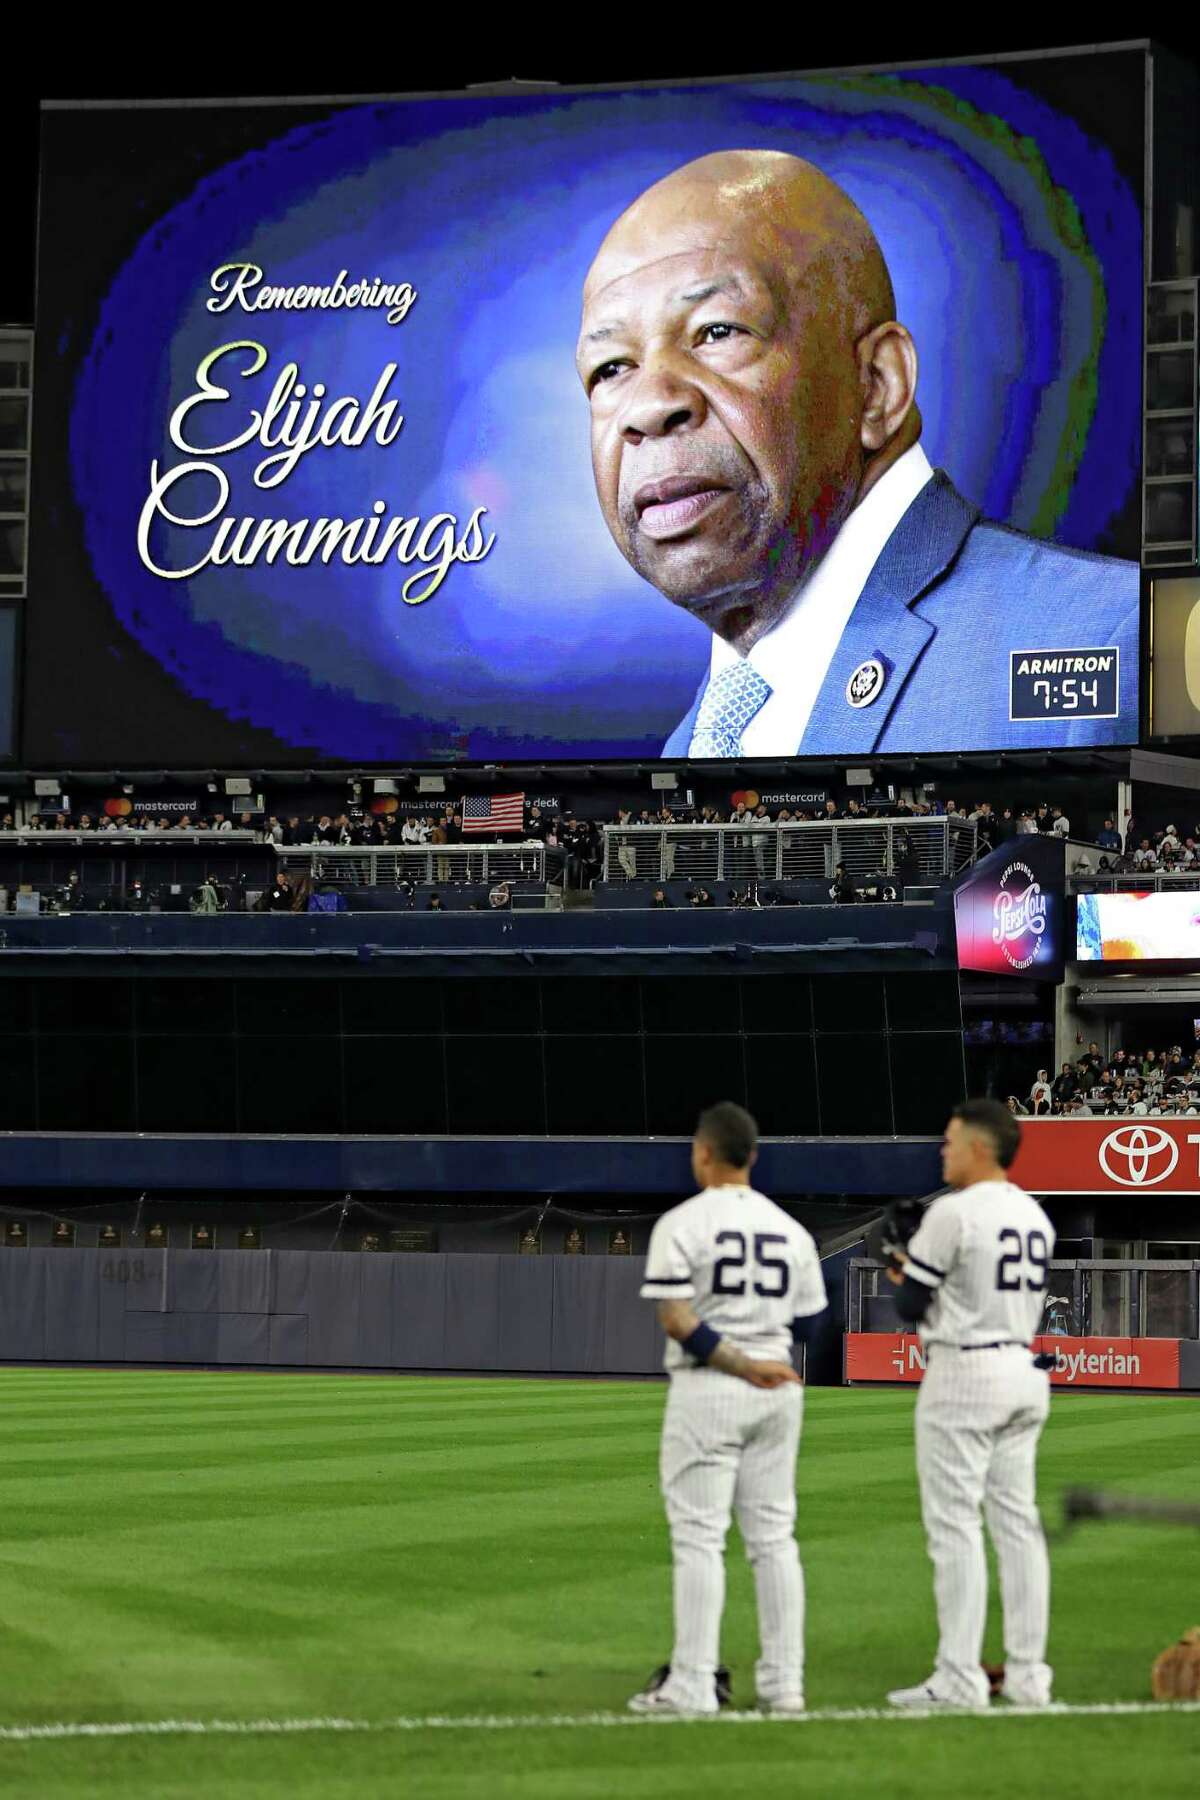 A moment of silence is held in honor of Elijah Cummings prior to game four of the American League Championship Series between the Houston Astros and the New York Yankees at Yankee Stadium on Oct. 17 in New York City.